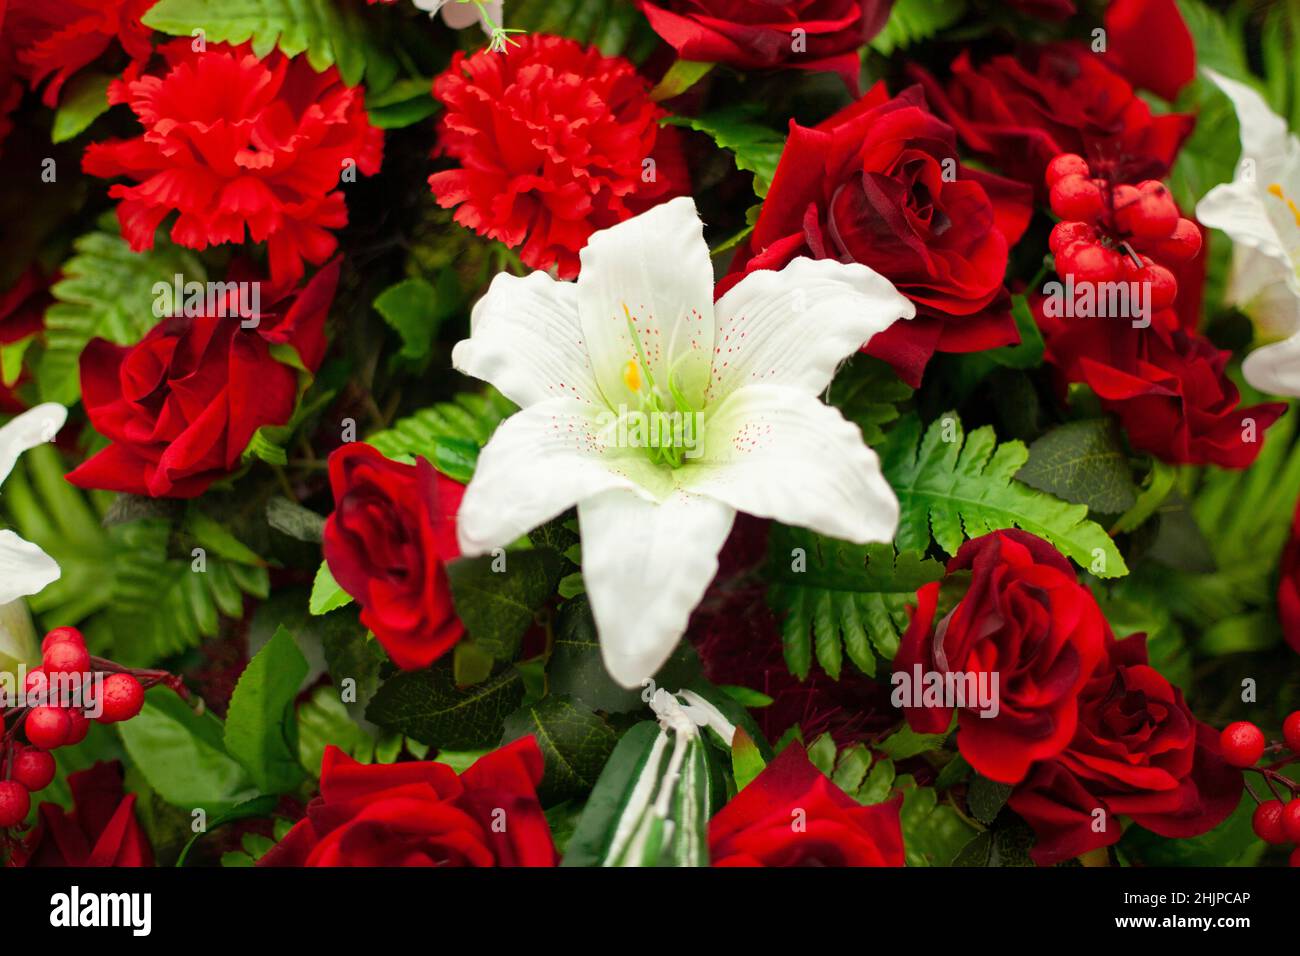 Flowers on monument. Artificial flowers on memorial. Solemn wreath on day of mourning. Funeral decoration. Stock Photo